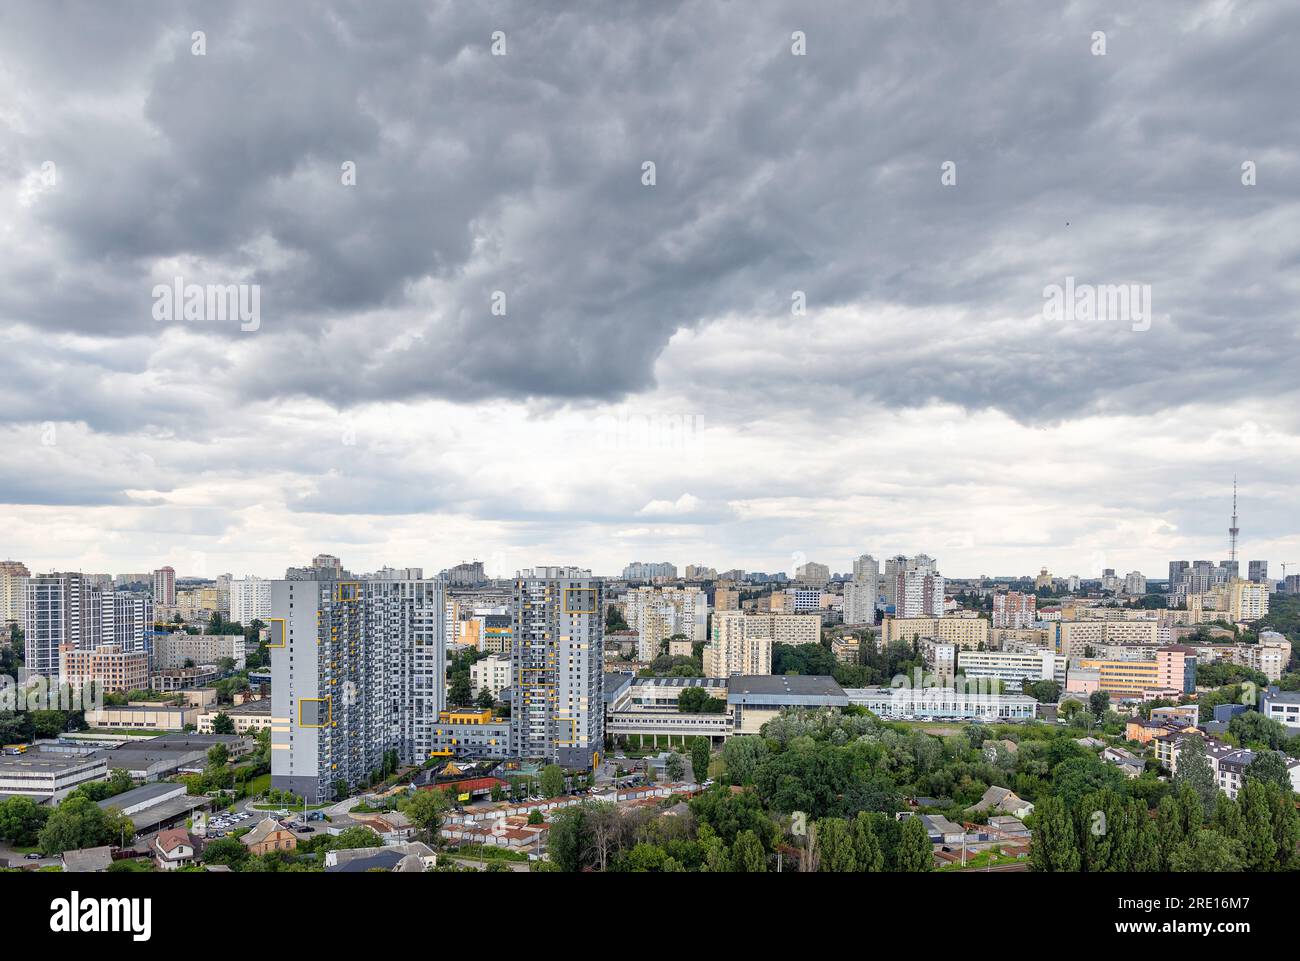 Aerial view, rain gray clouds gather over high-rise residential buildings in the city. Copy space. Stock Photo